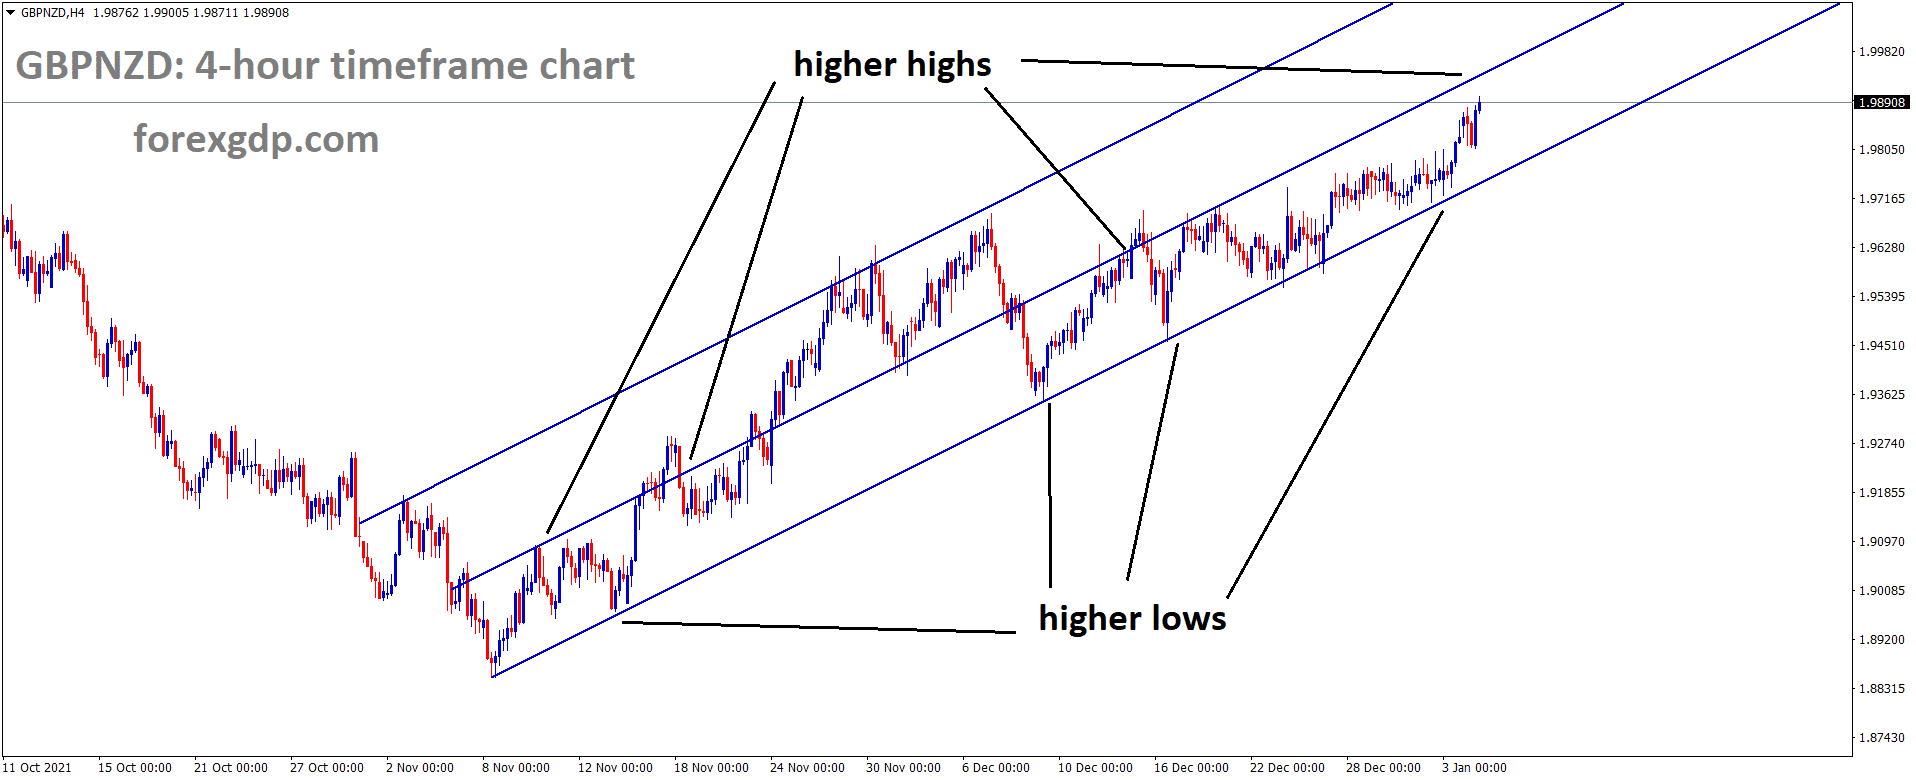 GBPNZD is moving in an Ascending channel and the market has reached the higher high area of the channel